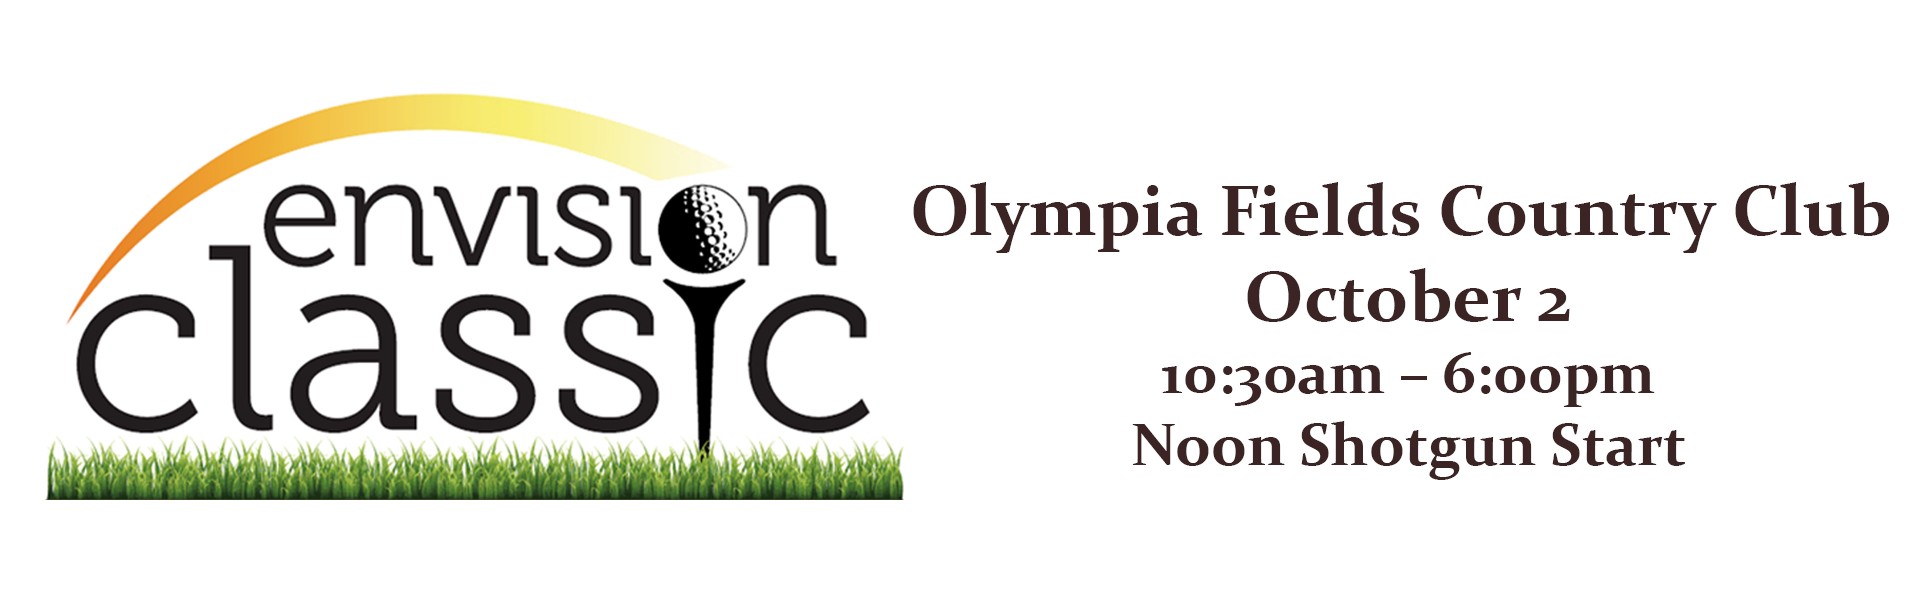 logo and details for golf classic